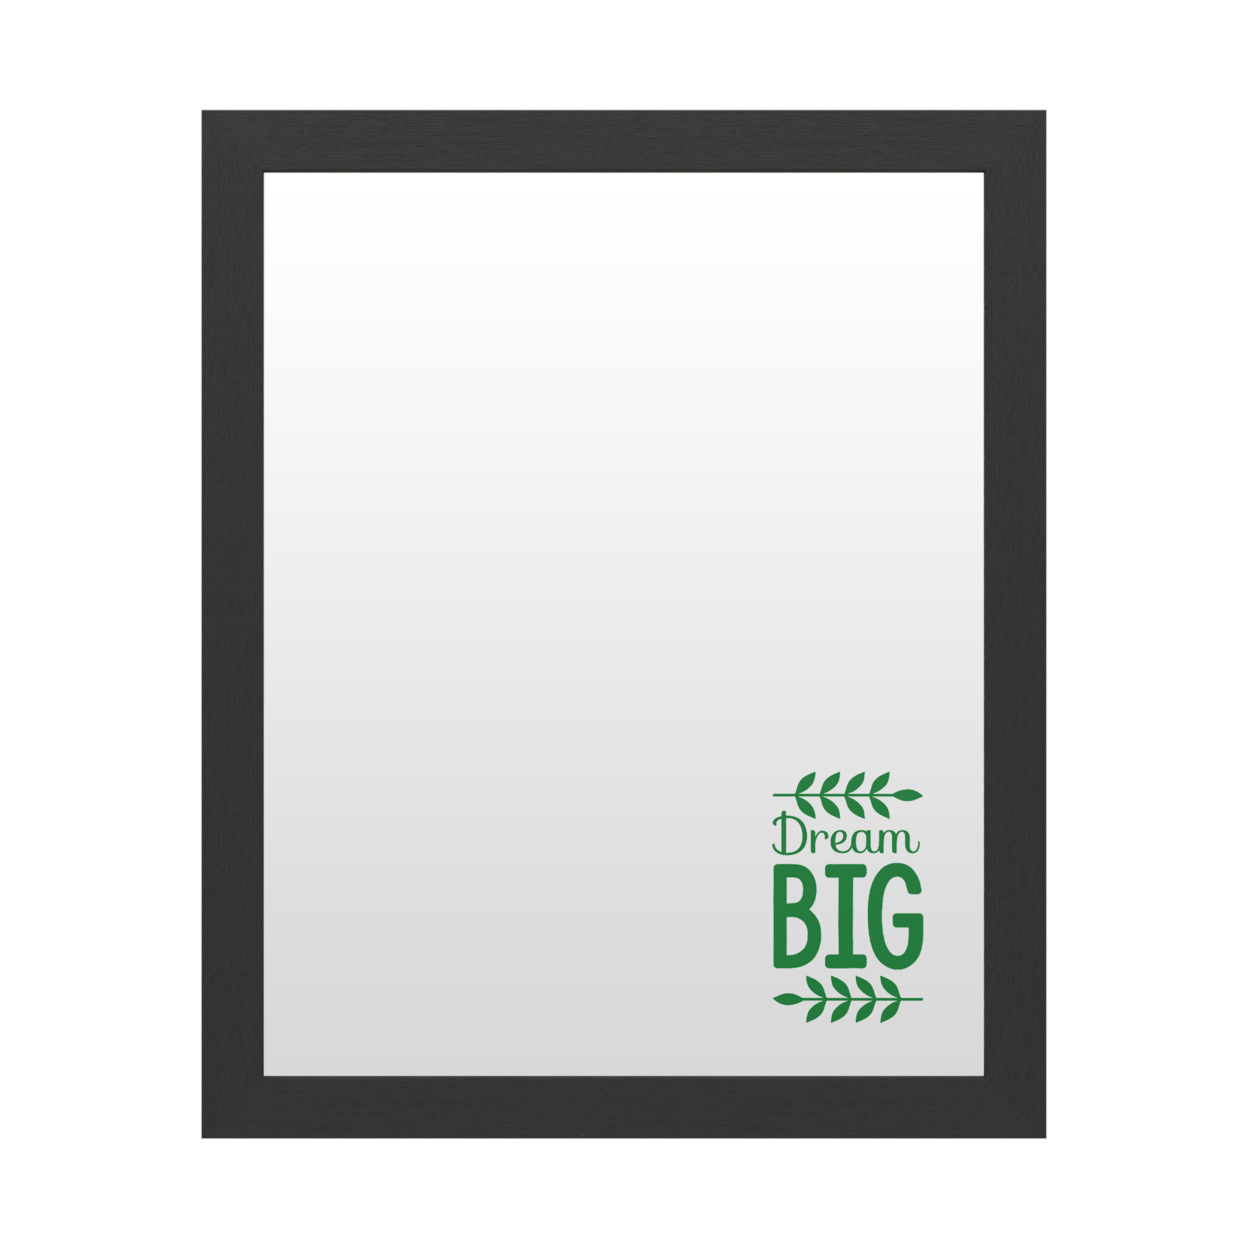 Dry Erase 16 X 20 Marker Board With Printed Artwork - Dream Big 2 White Board - Ready To Hang